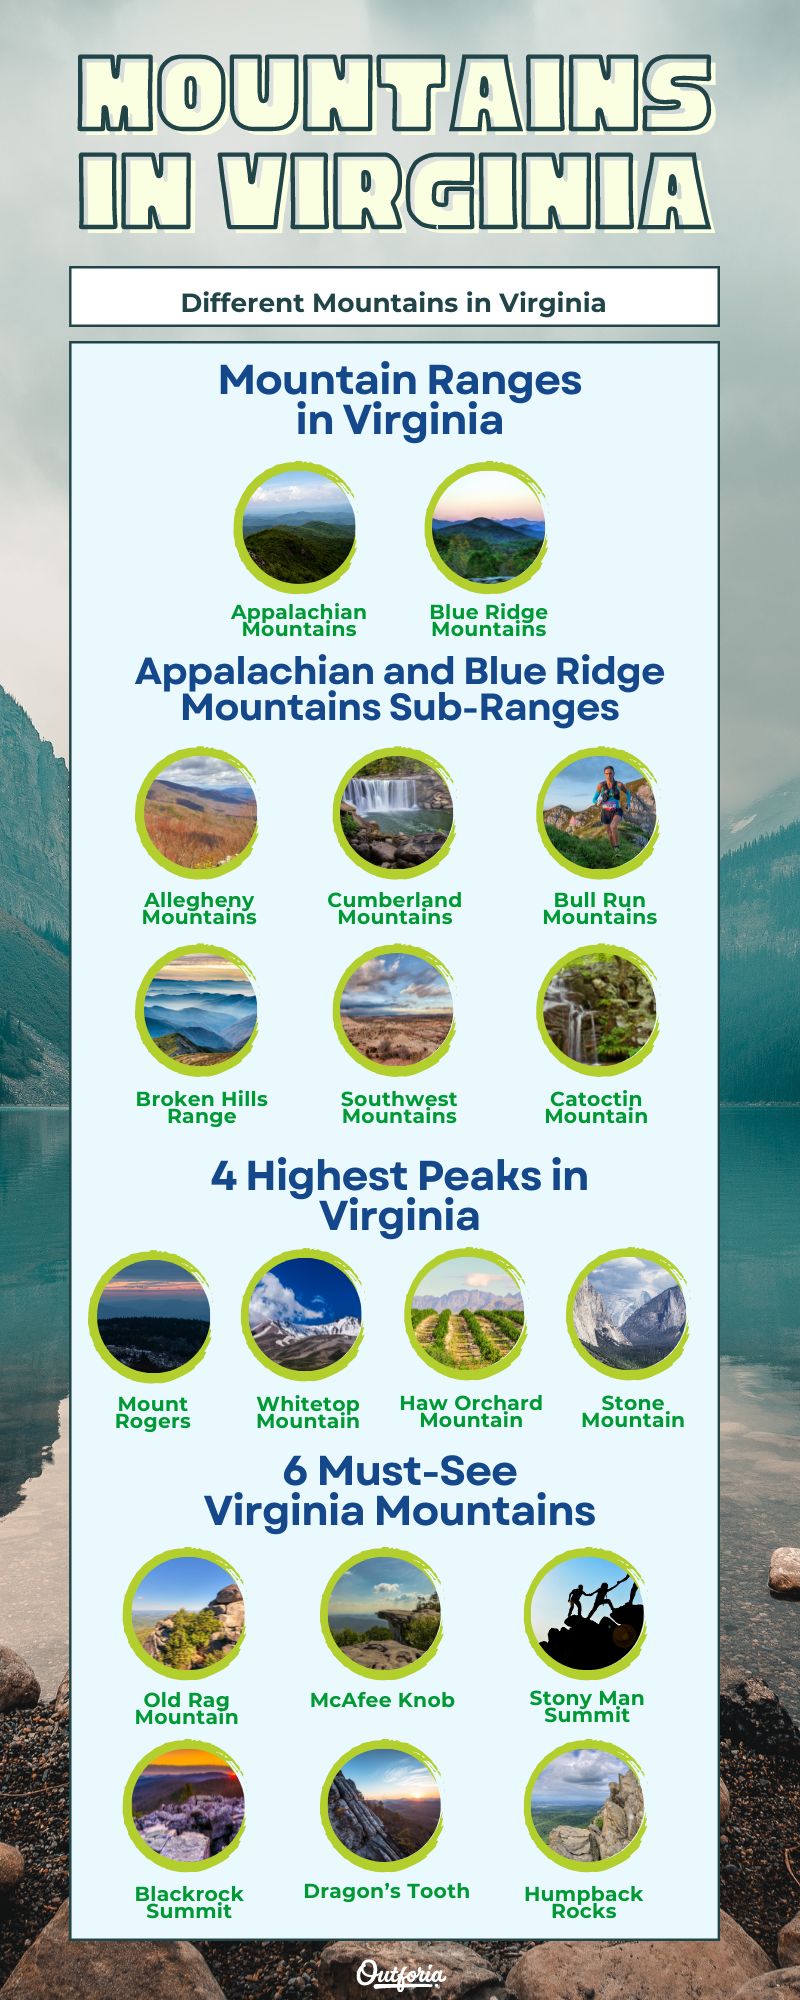 Chart of different mountains in virginia complete with photos